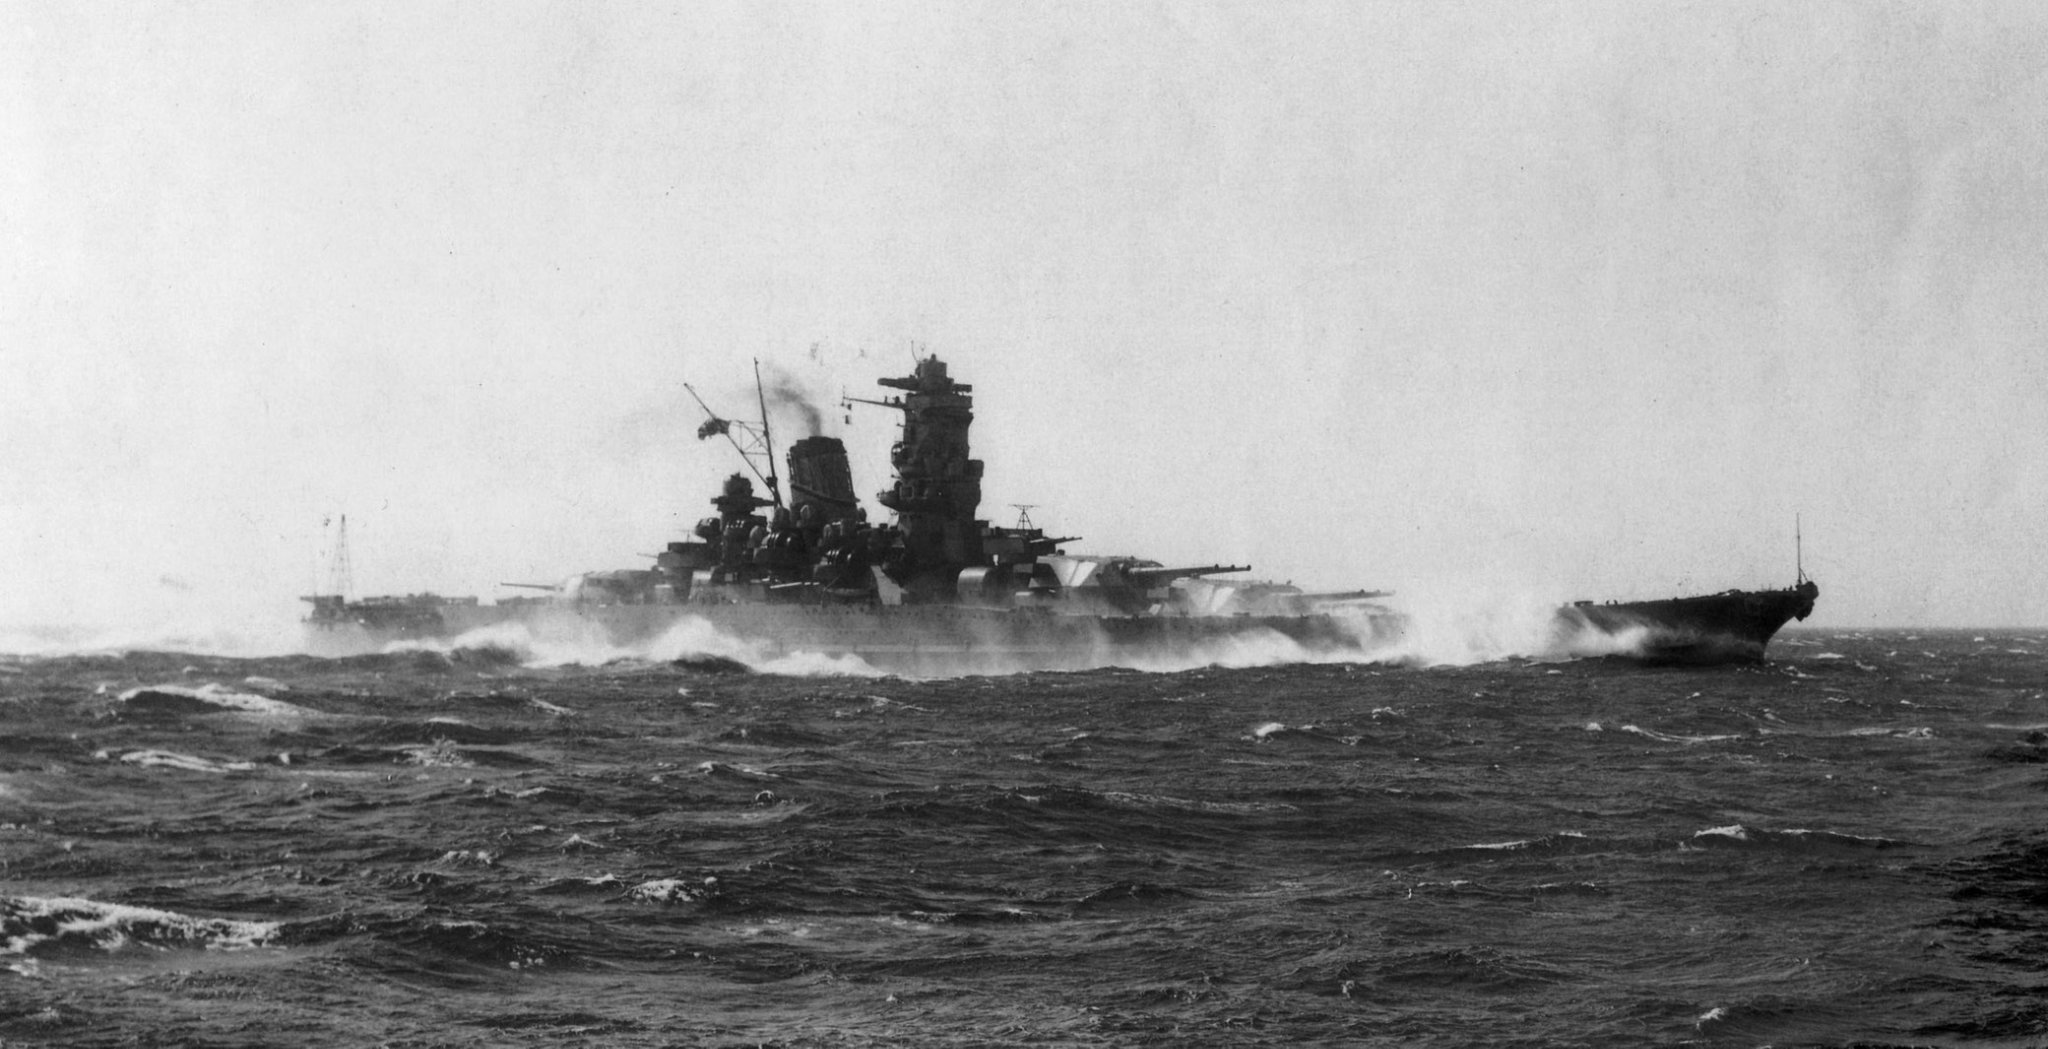 The Yamato battleship: Imperial Japan's ultimate weapon and its dramatic demise